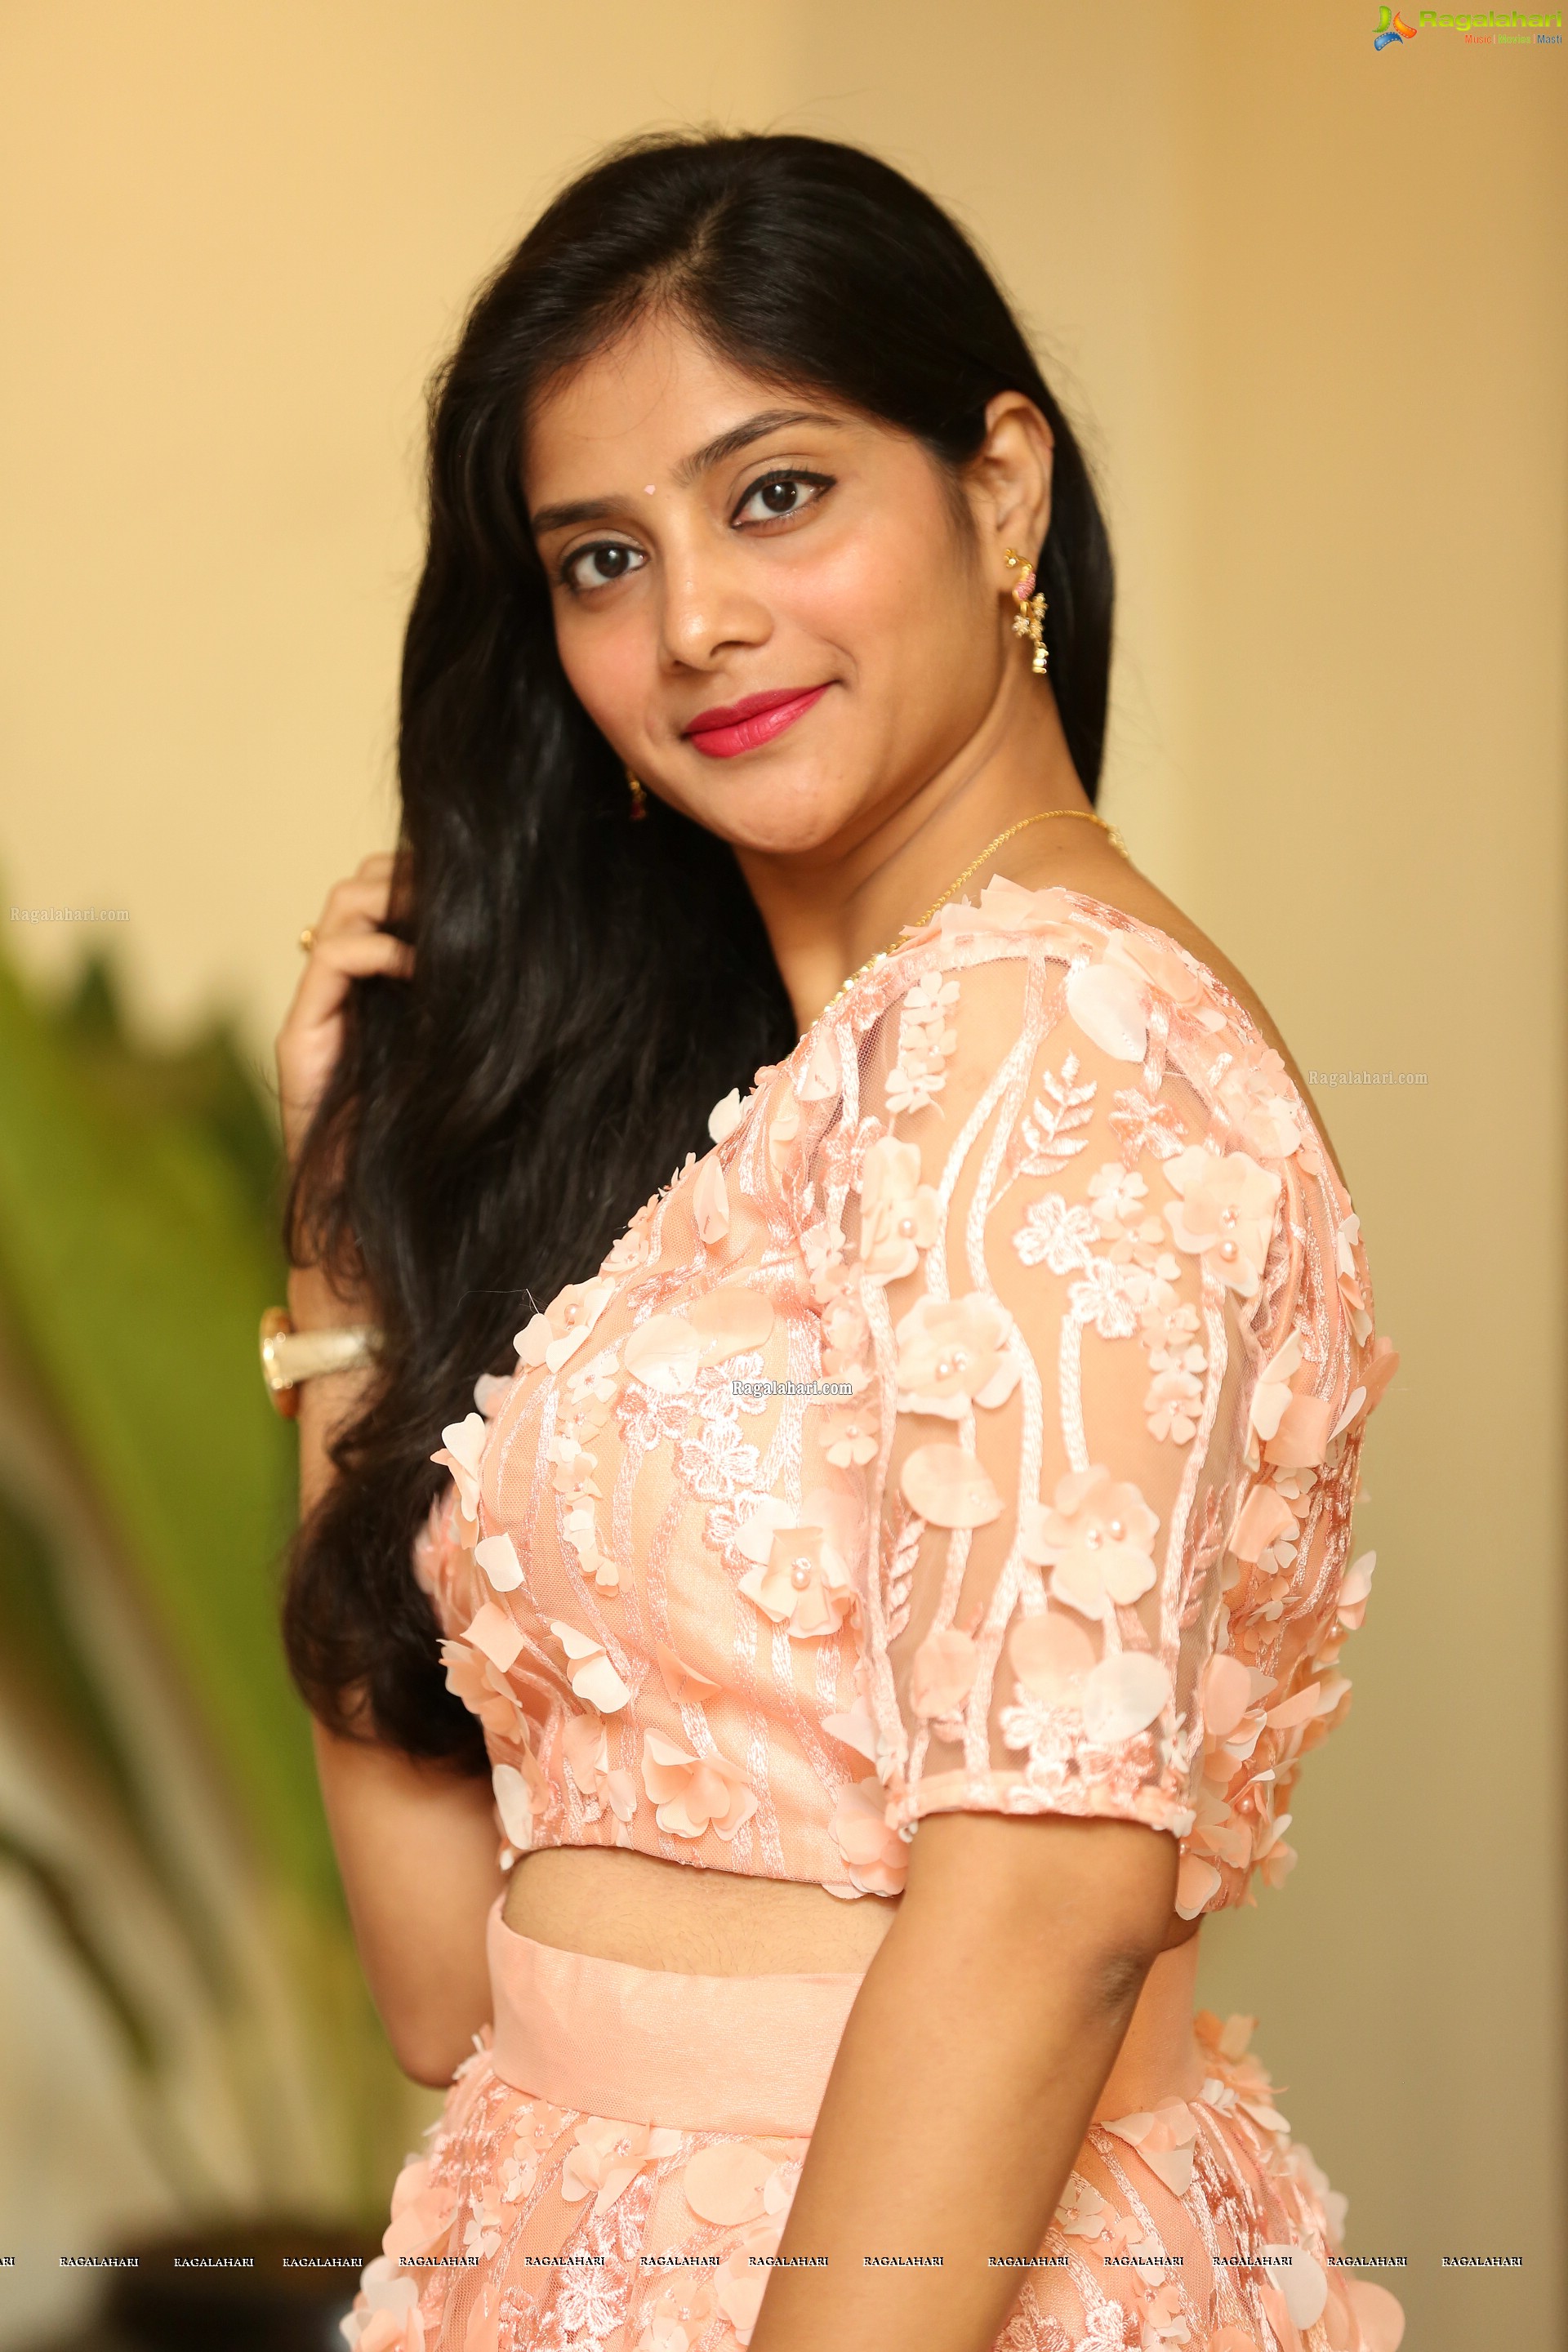 Anuhya at The Haat Fashion & Lifestyle Expo - HD Gallery